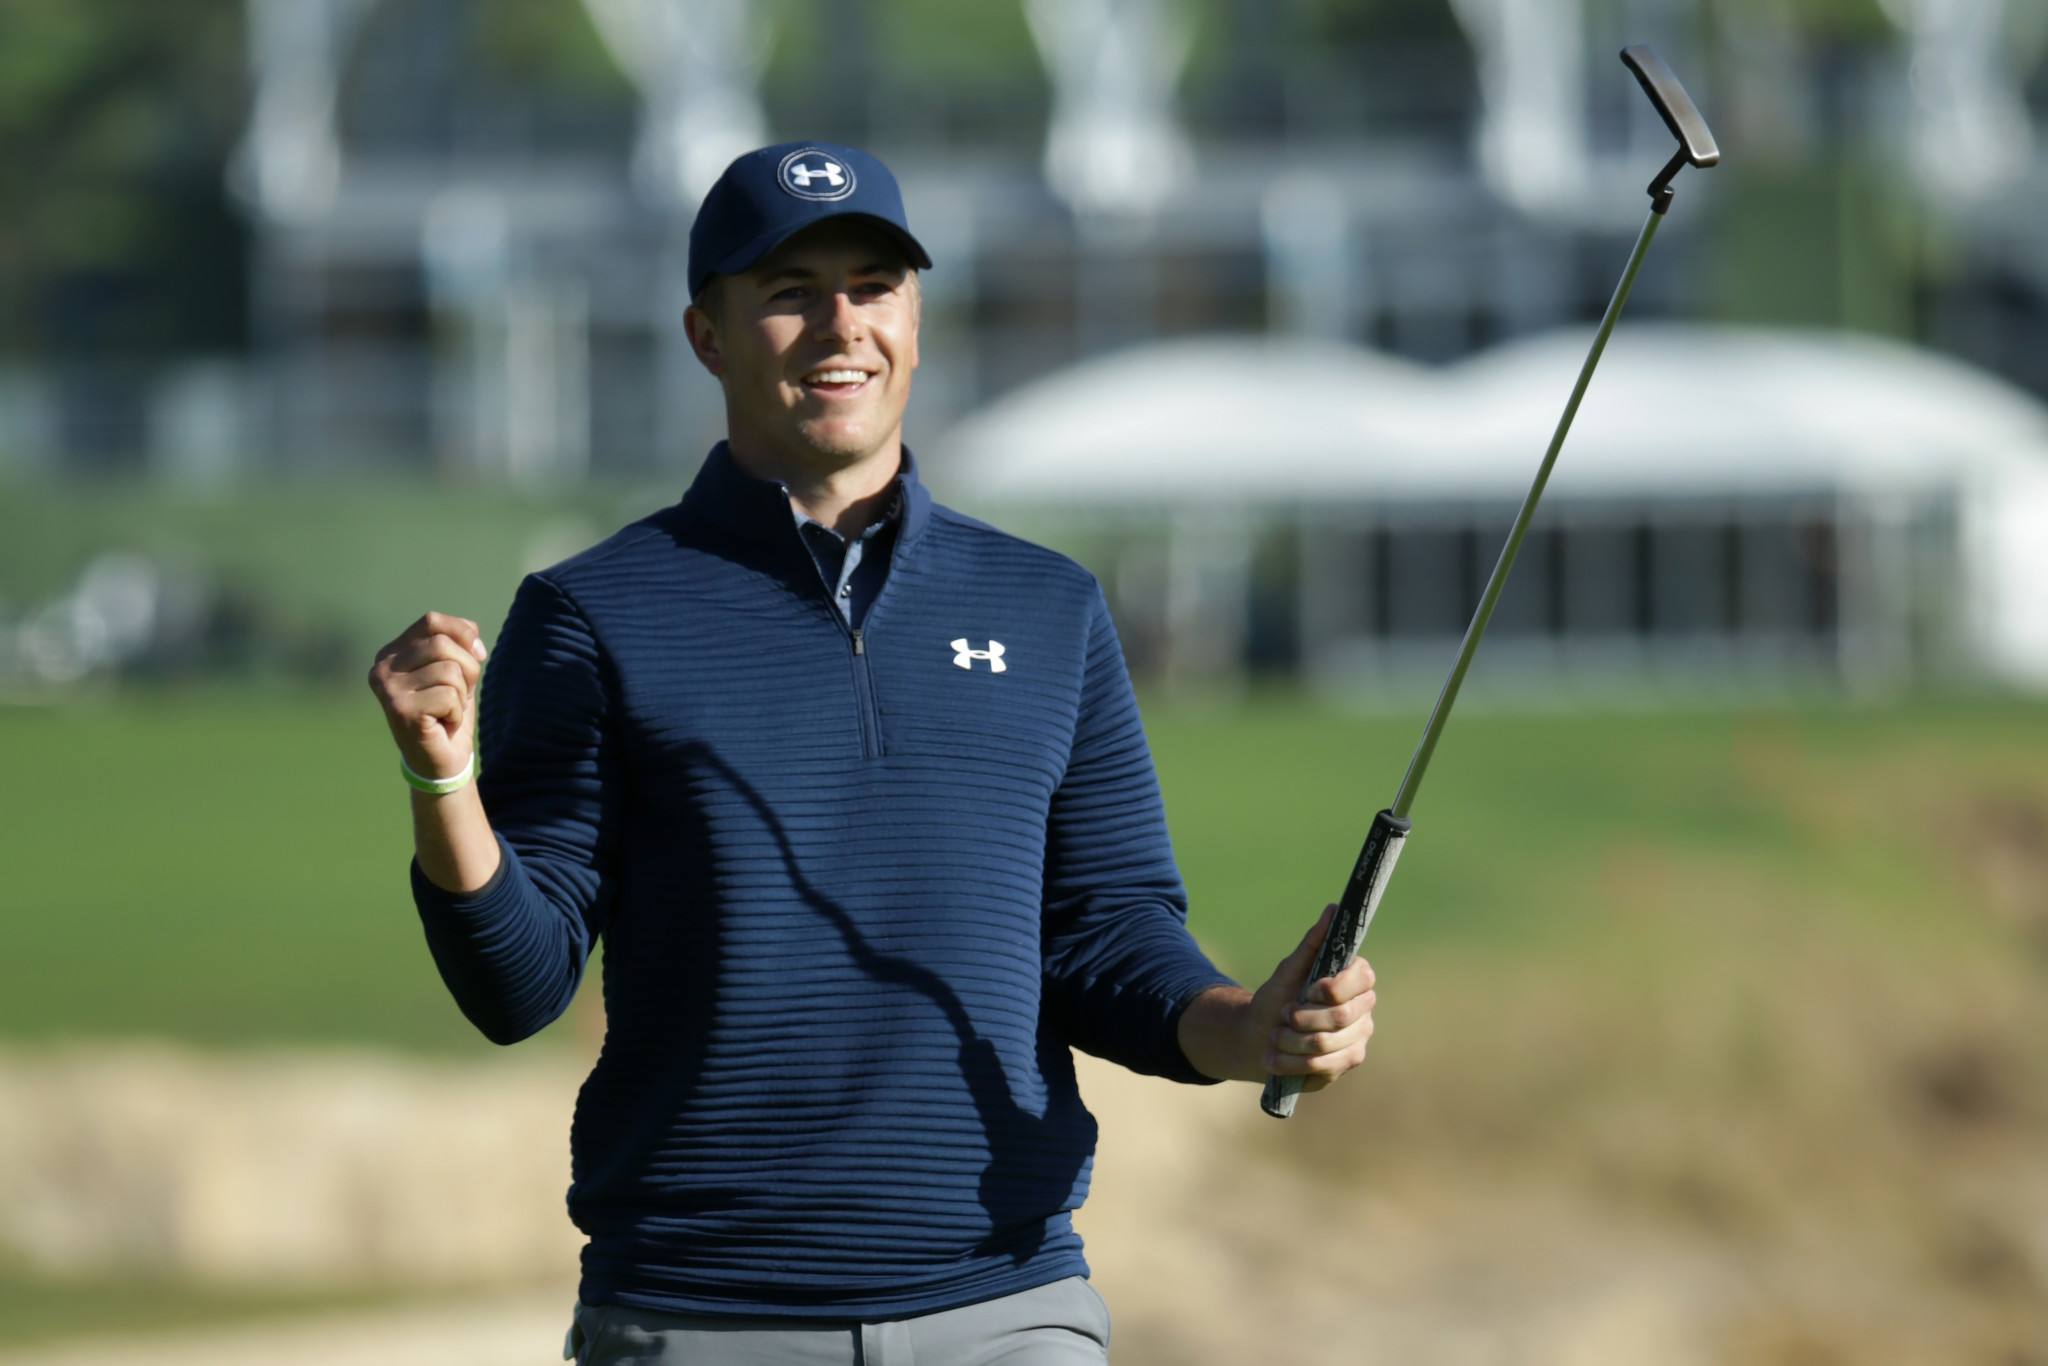 Jordan Spieth, The 2015 Version, Just Might Be Back